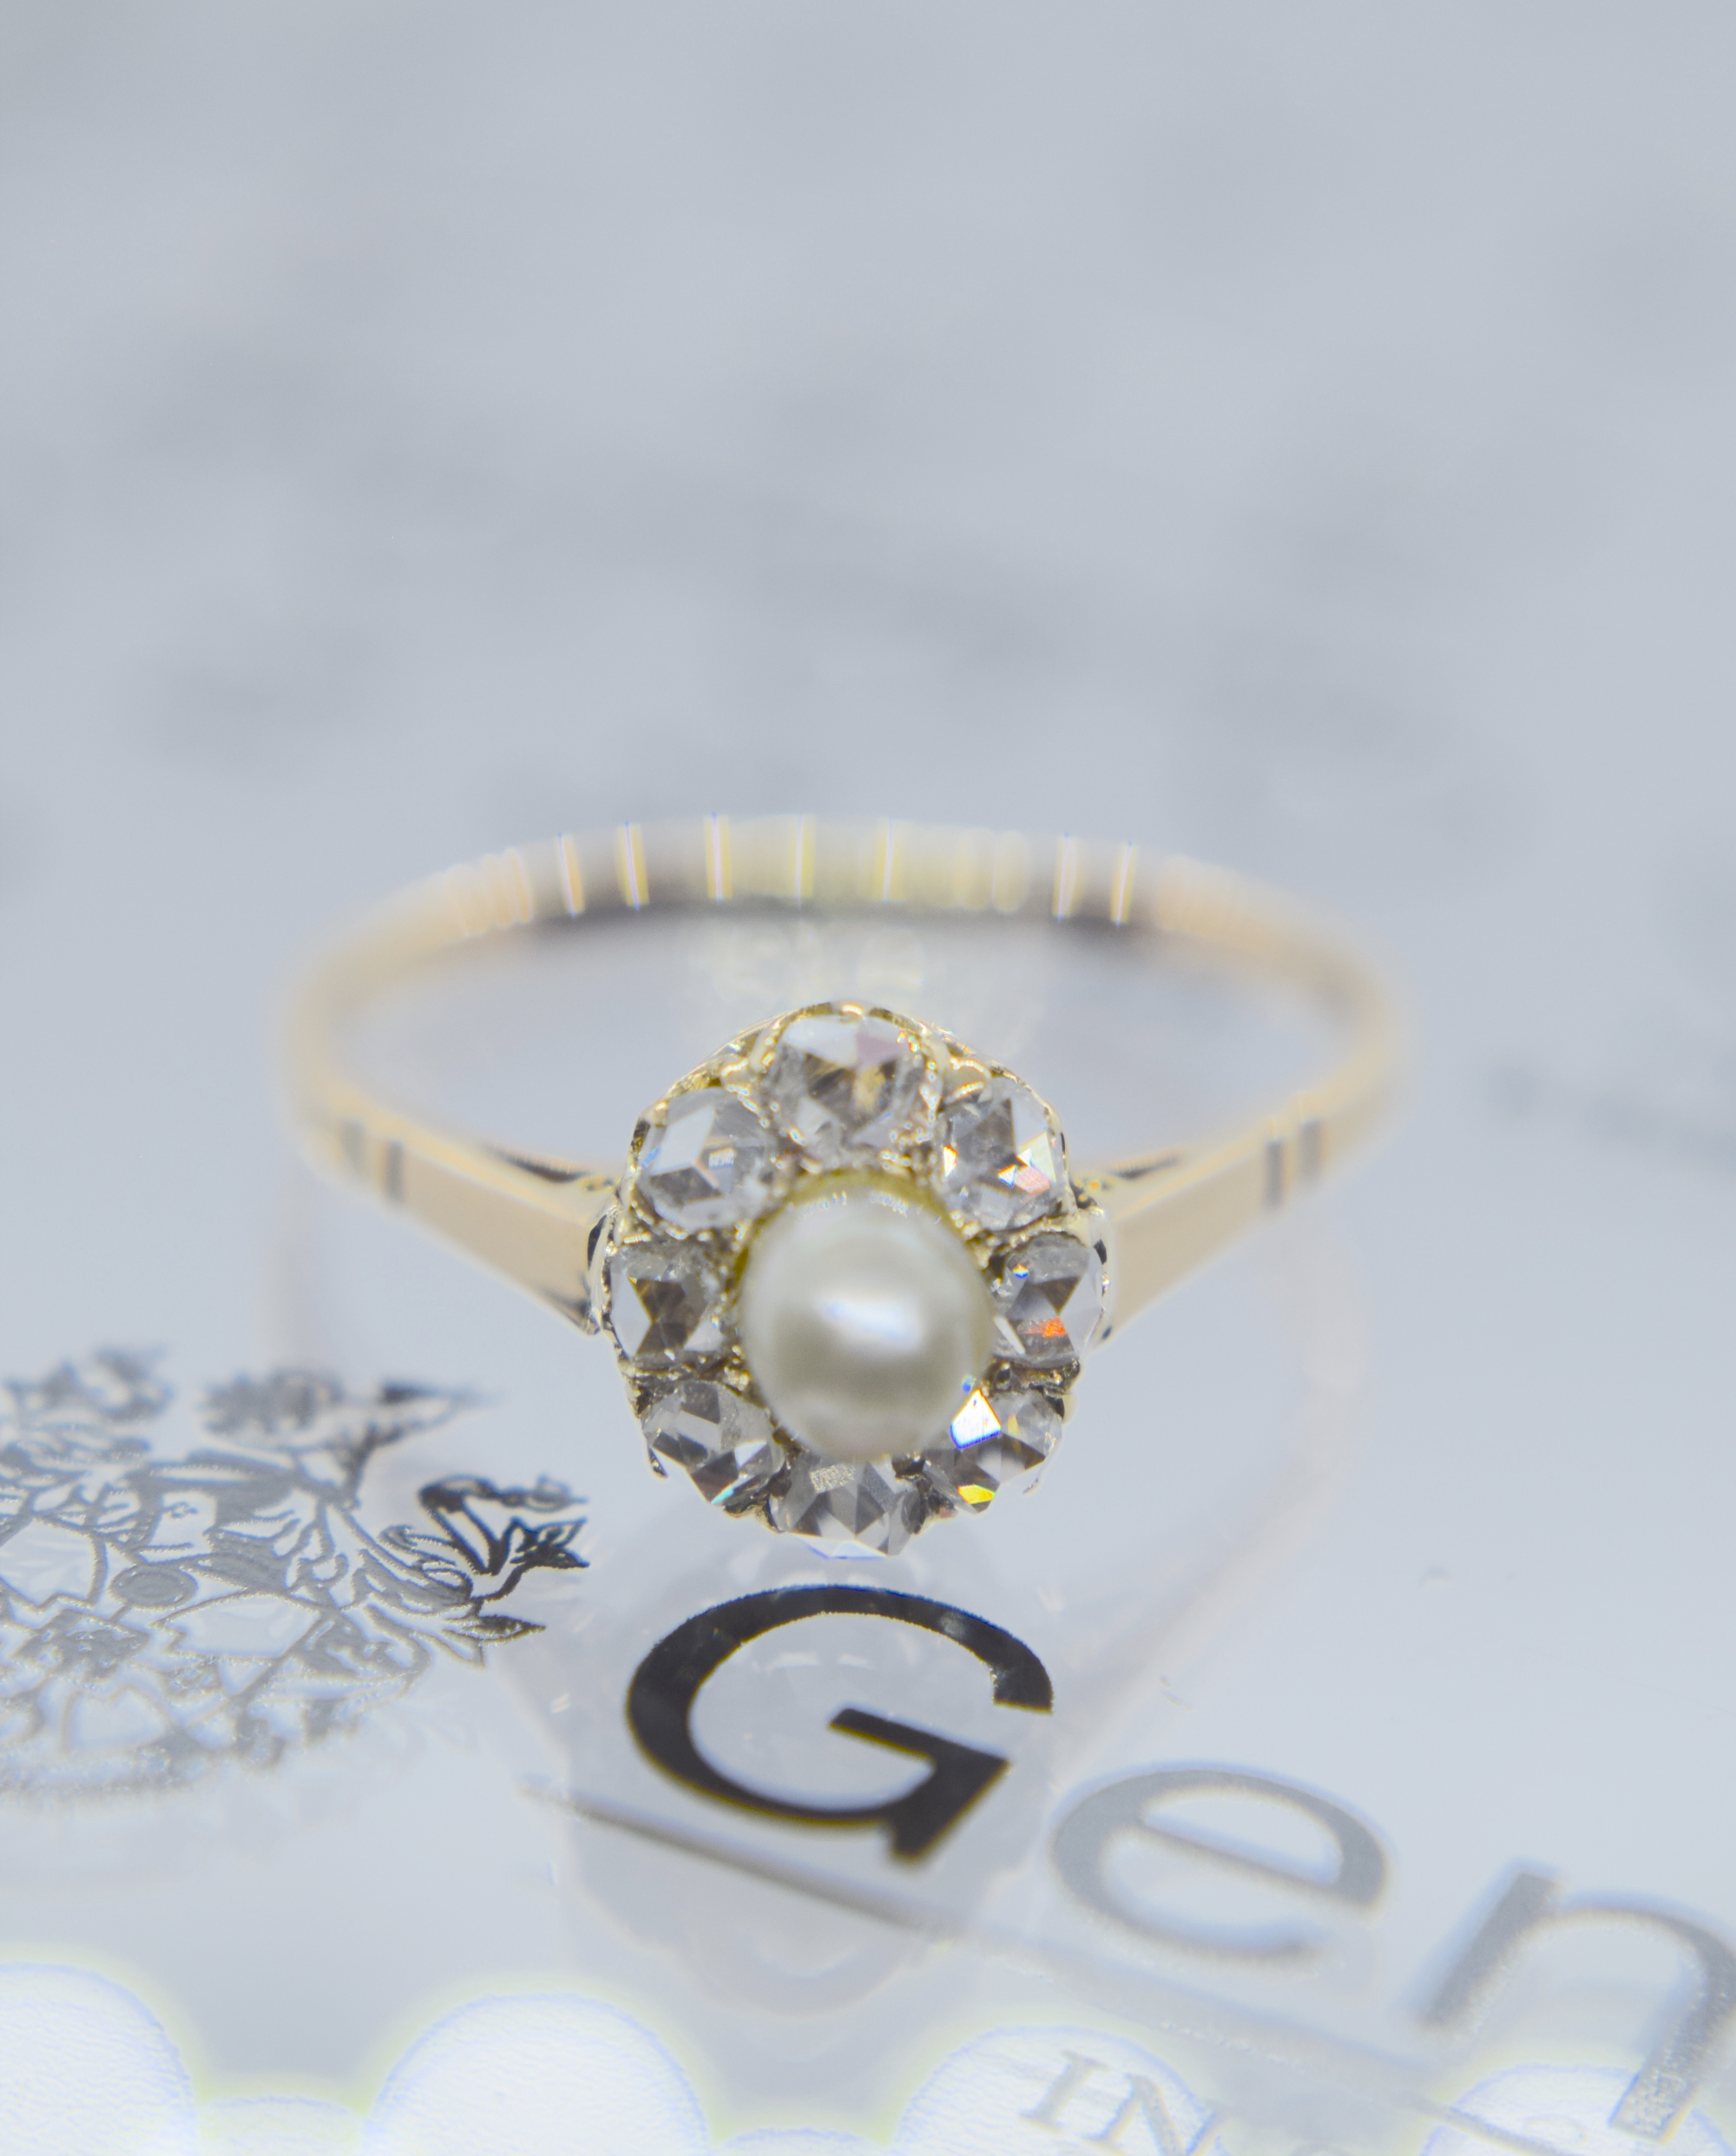 VINTAGE 1.00CT IVORY PEARL & ROSE CUT DIAMOND RING IN YELLOW & ROSE GOLD